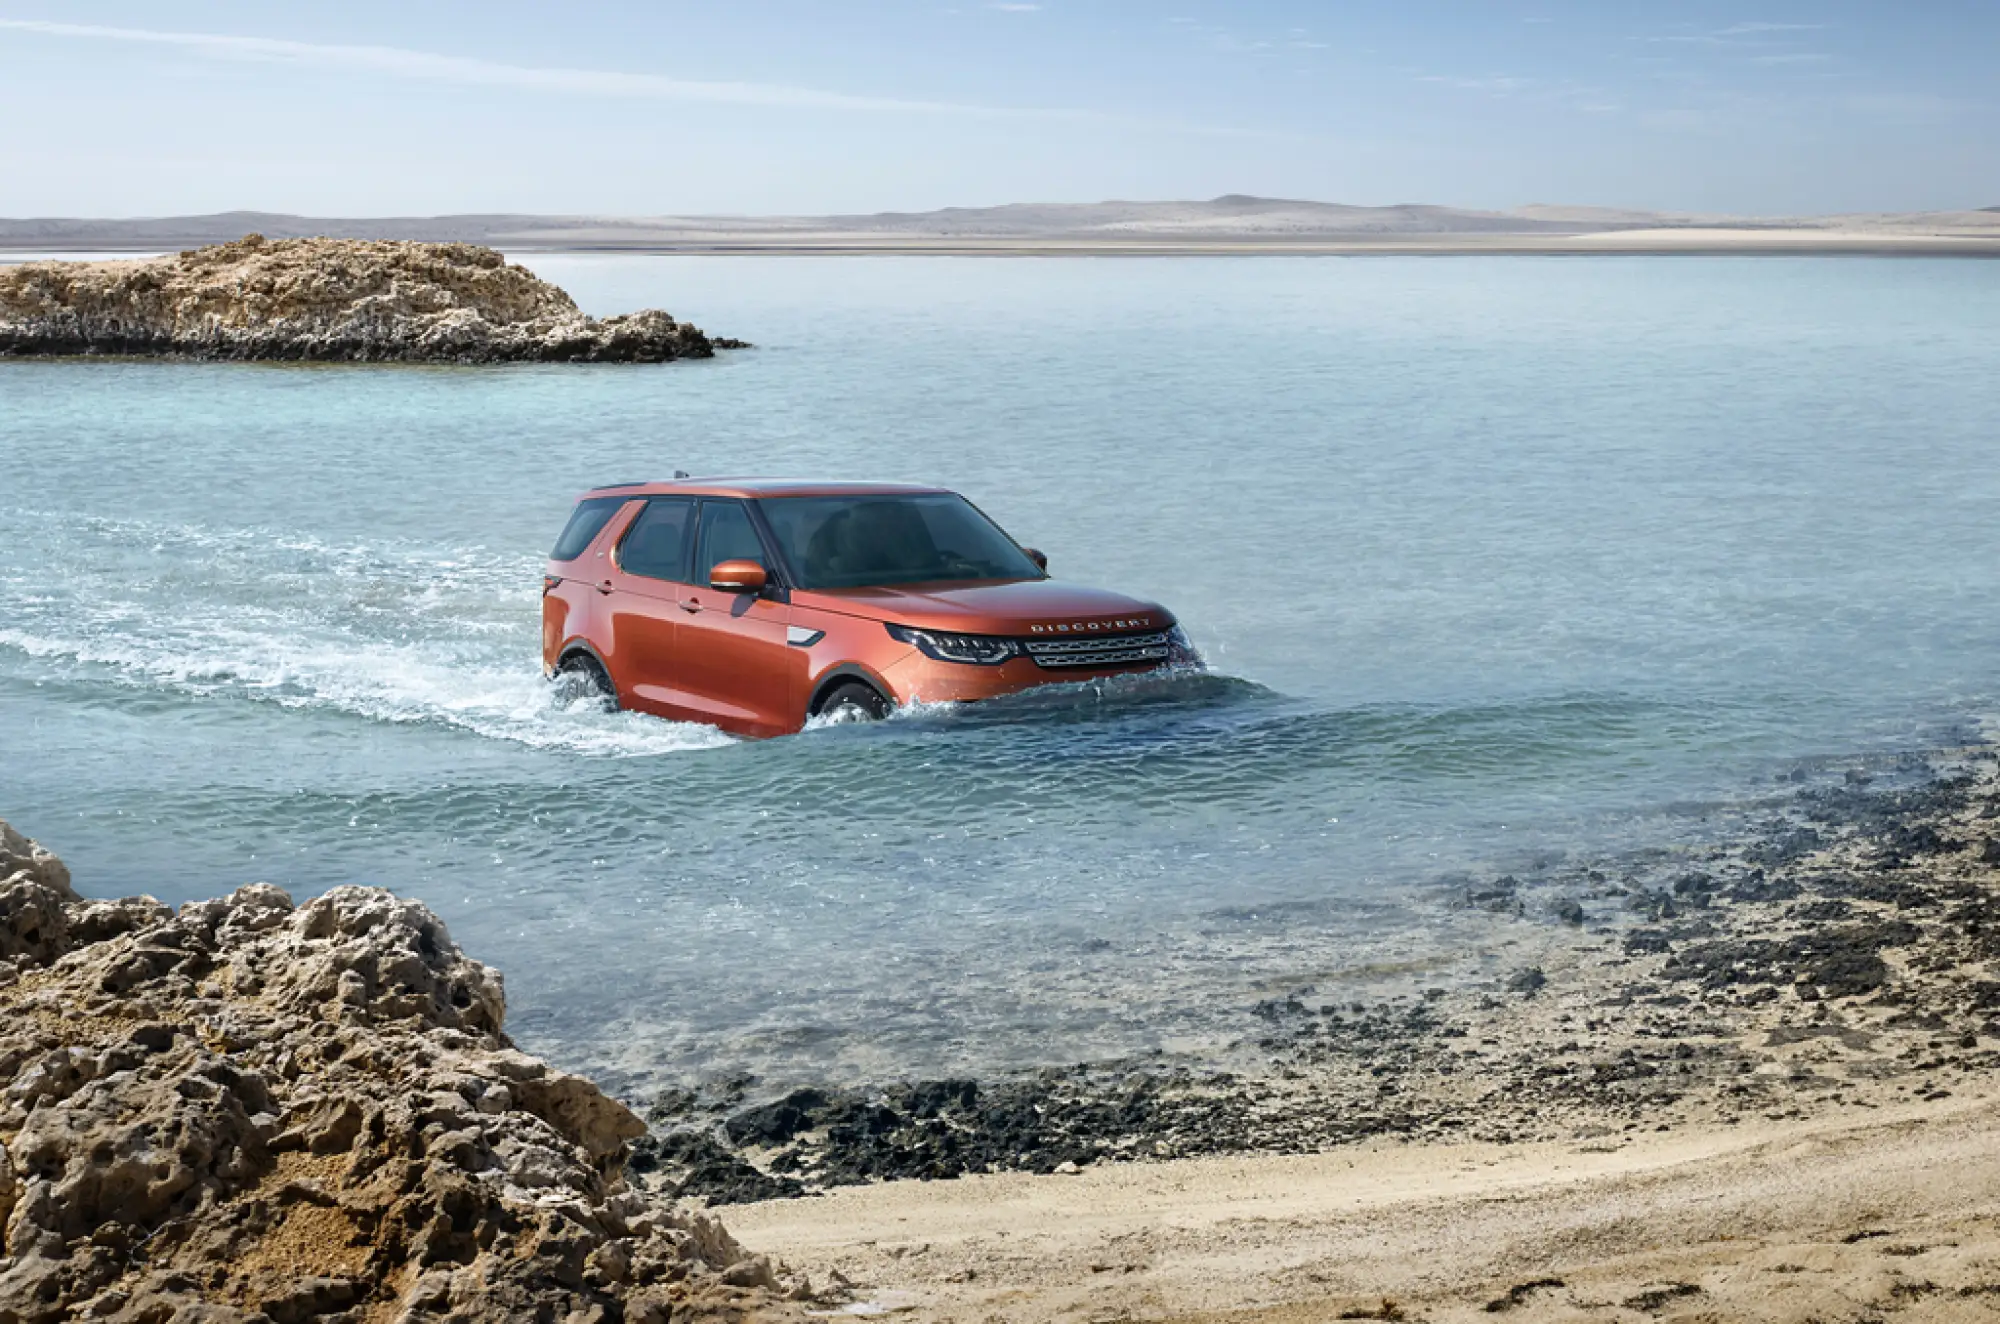 Foto stampa nuova Land Rover Discovery MY 2017 28 settembre 2016 - 38